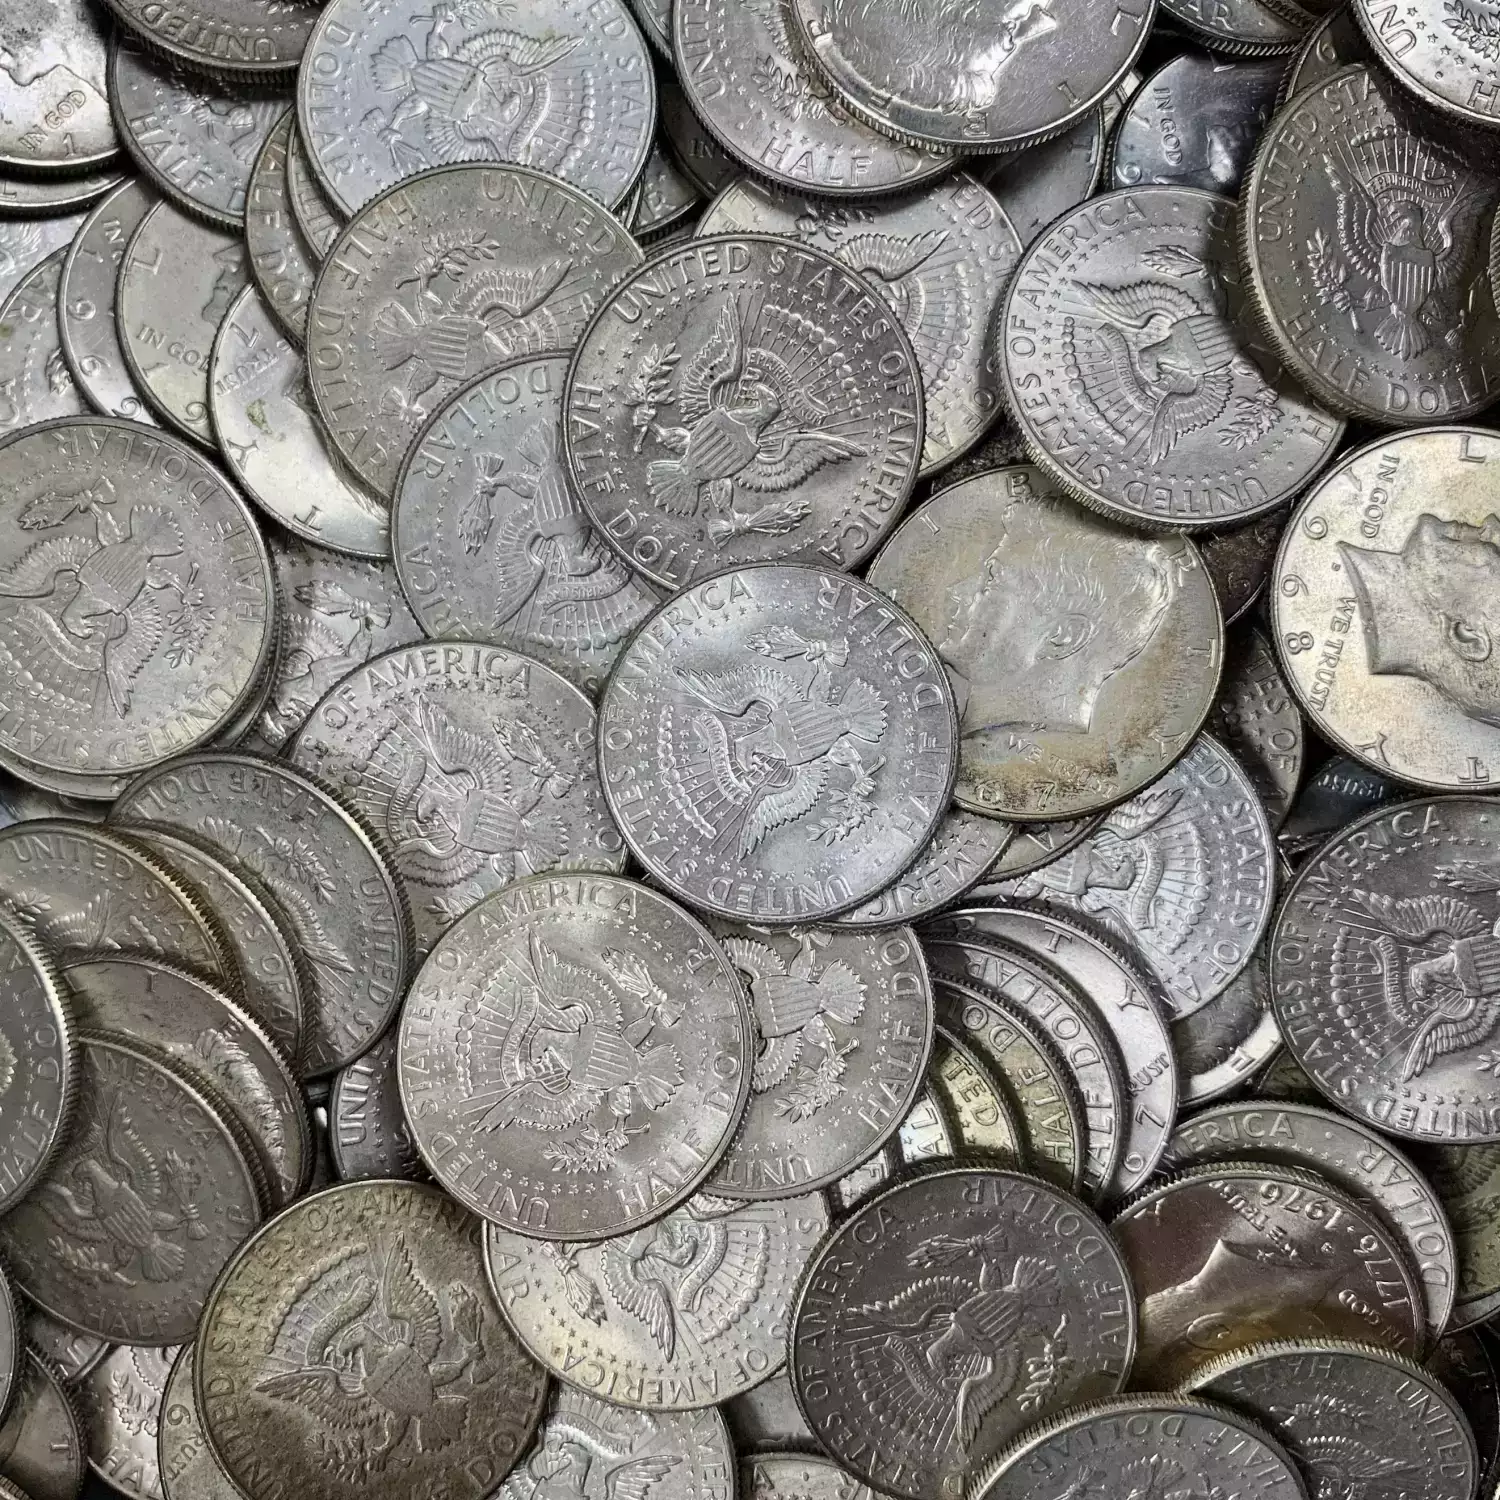 US 40% Silver Coinage - Kennedy Halves 65-69 - Junk Silver